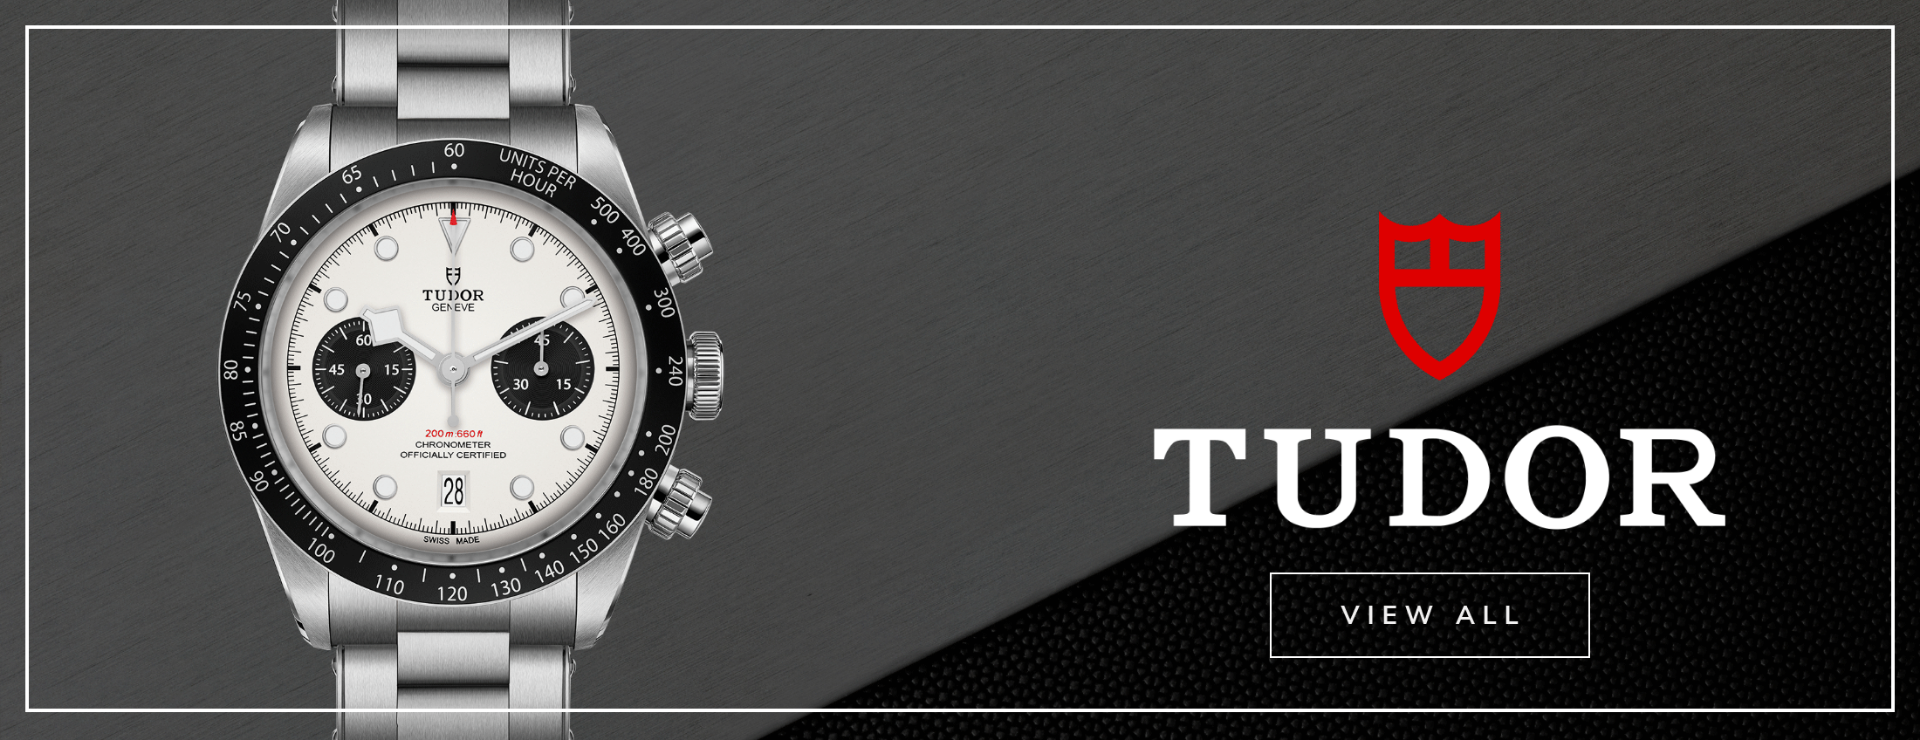 TUDOR watch with grey and black background and the text Tudor Shop Now